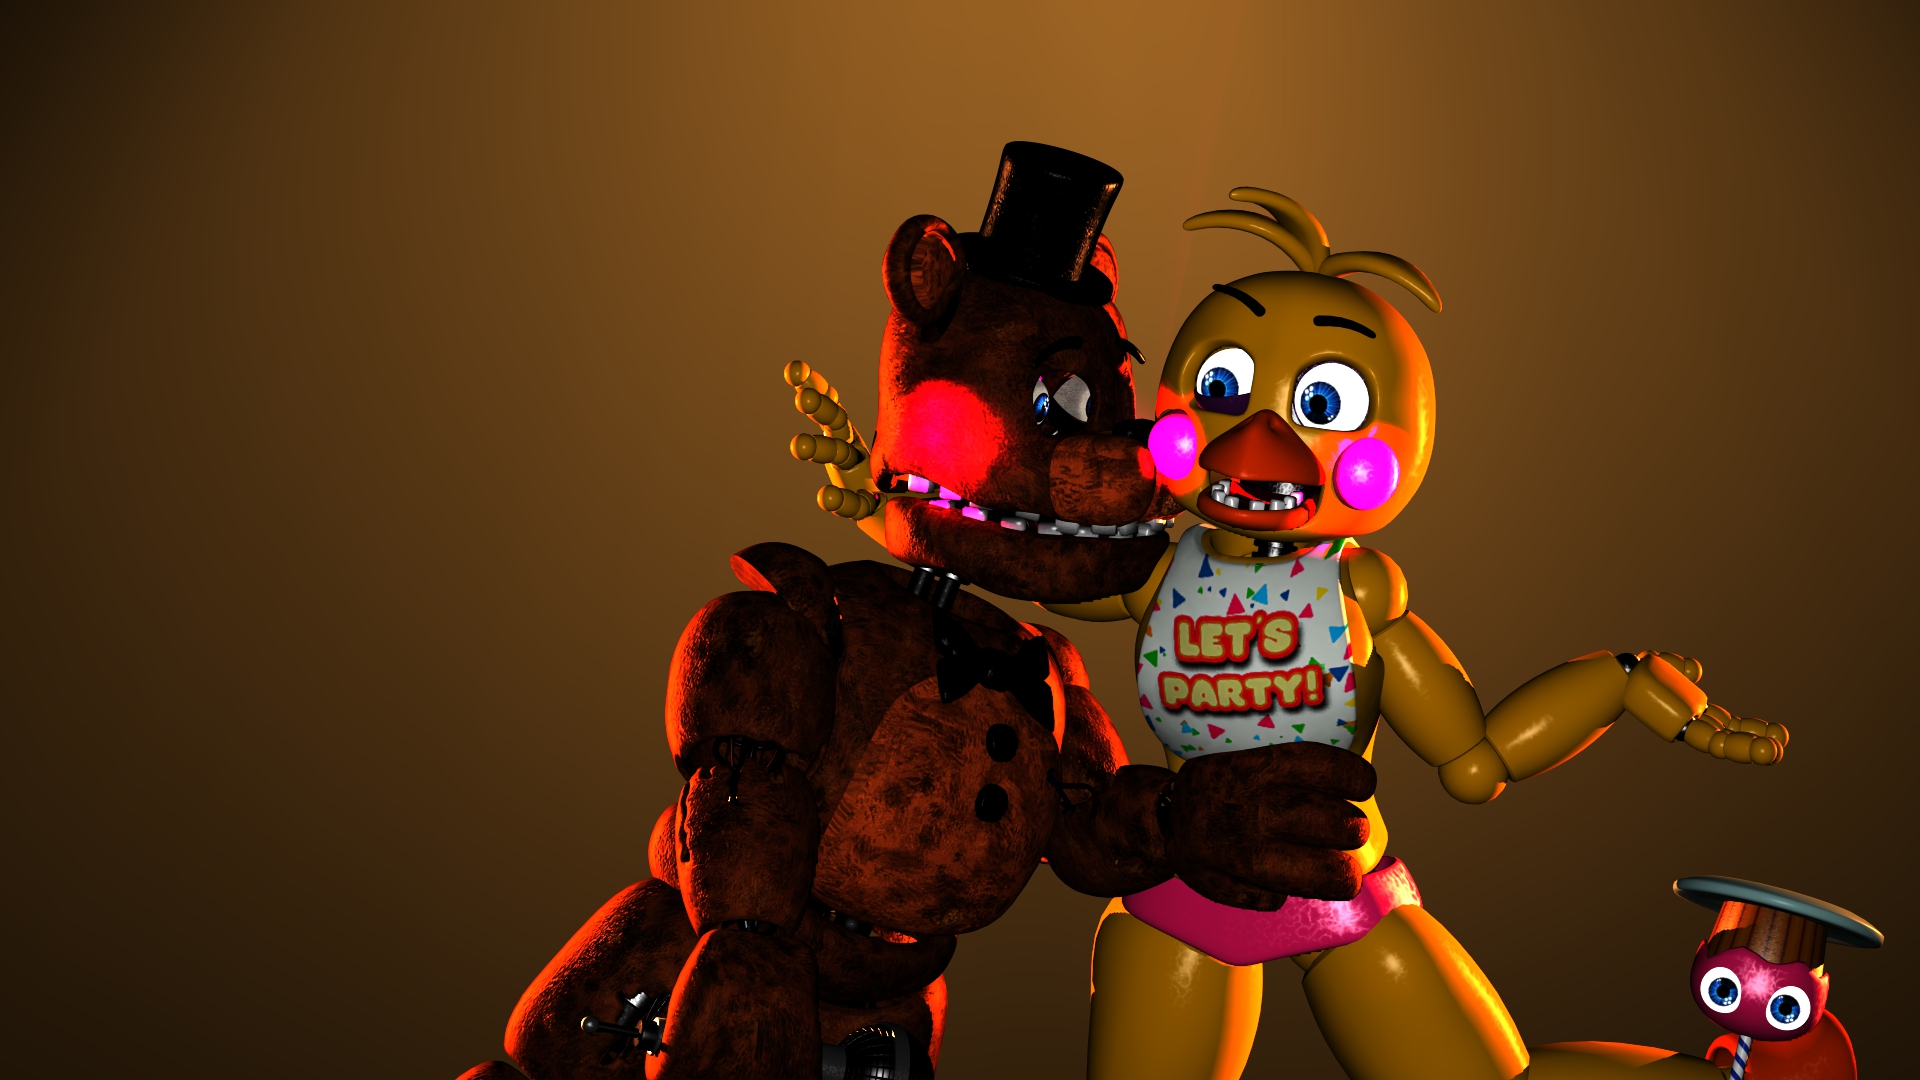 Withered Freddy, Withered Bonnie, Withered Chica, Toy Freddy, The Puppet,  Me, Mangle, Carl, and Nightmare Bonnie!❤✌